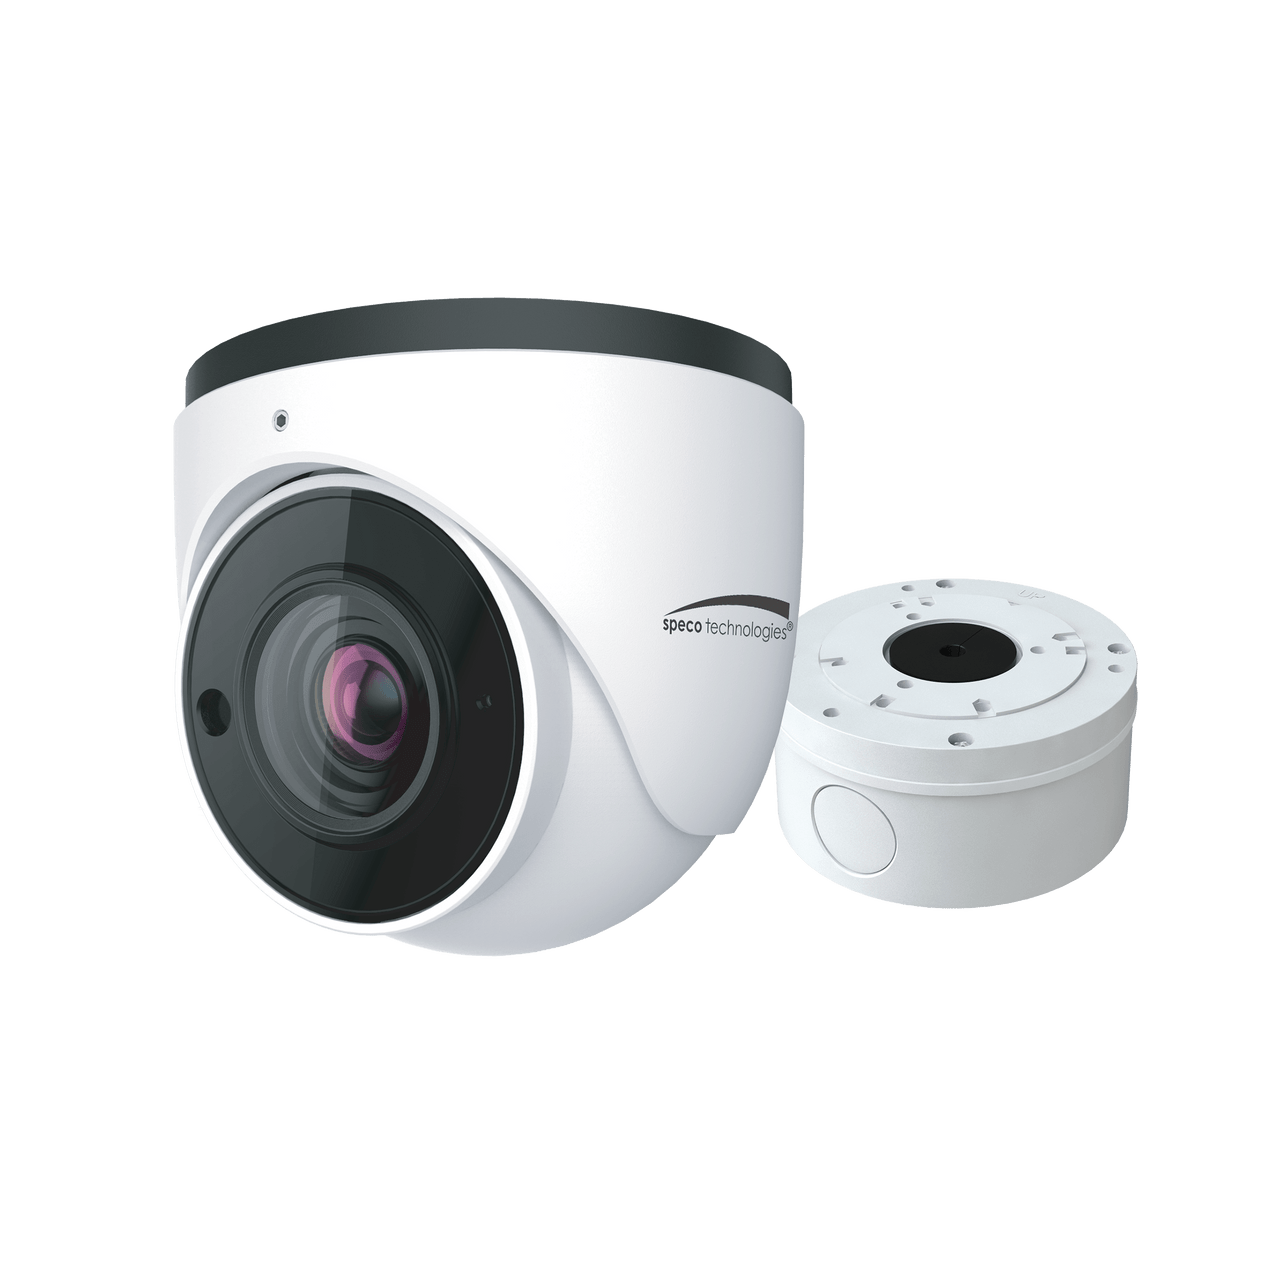 Speco Technologies O4VT1M 4MP H.265 IP Turret Camera with IR, 2.8-12mm motorized Lens, Included Junction Box, White (SPE-O4VT1M)